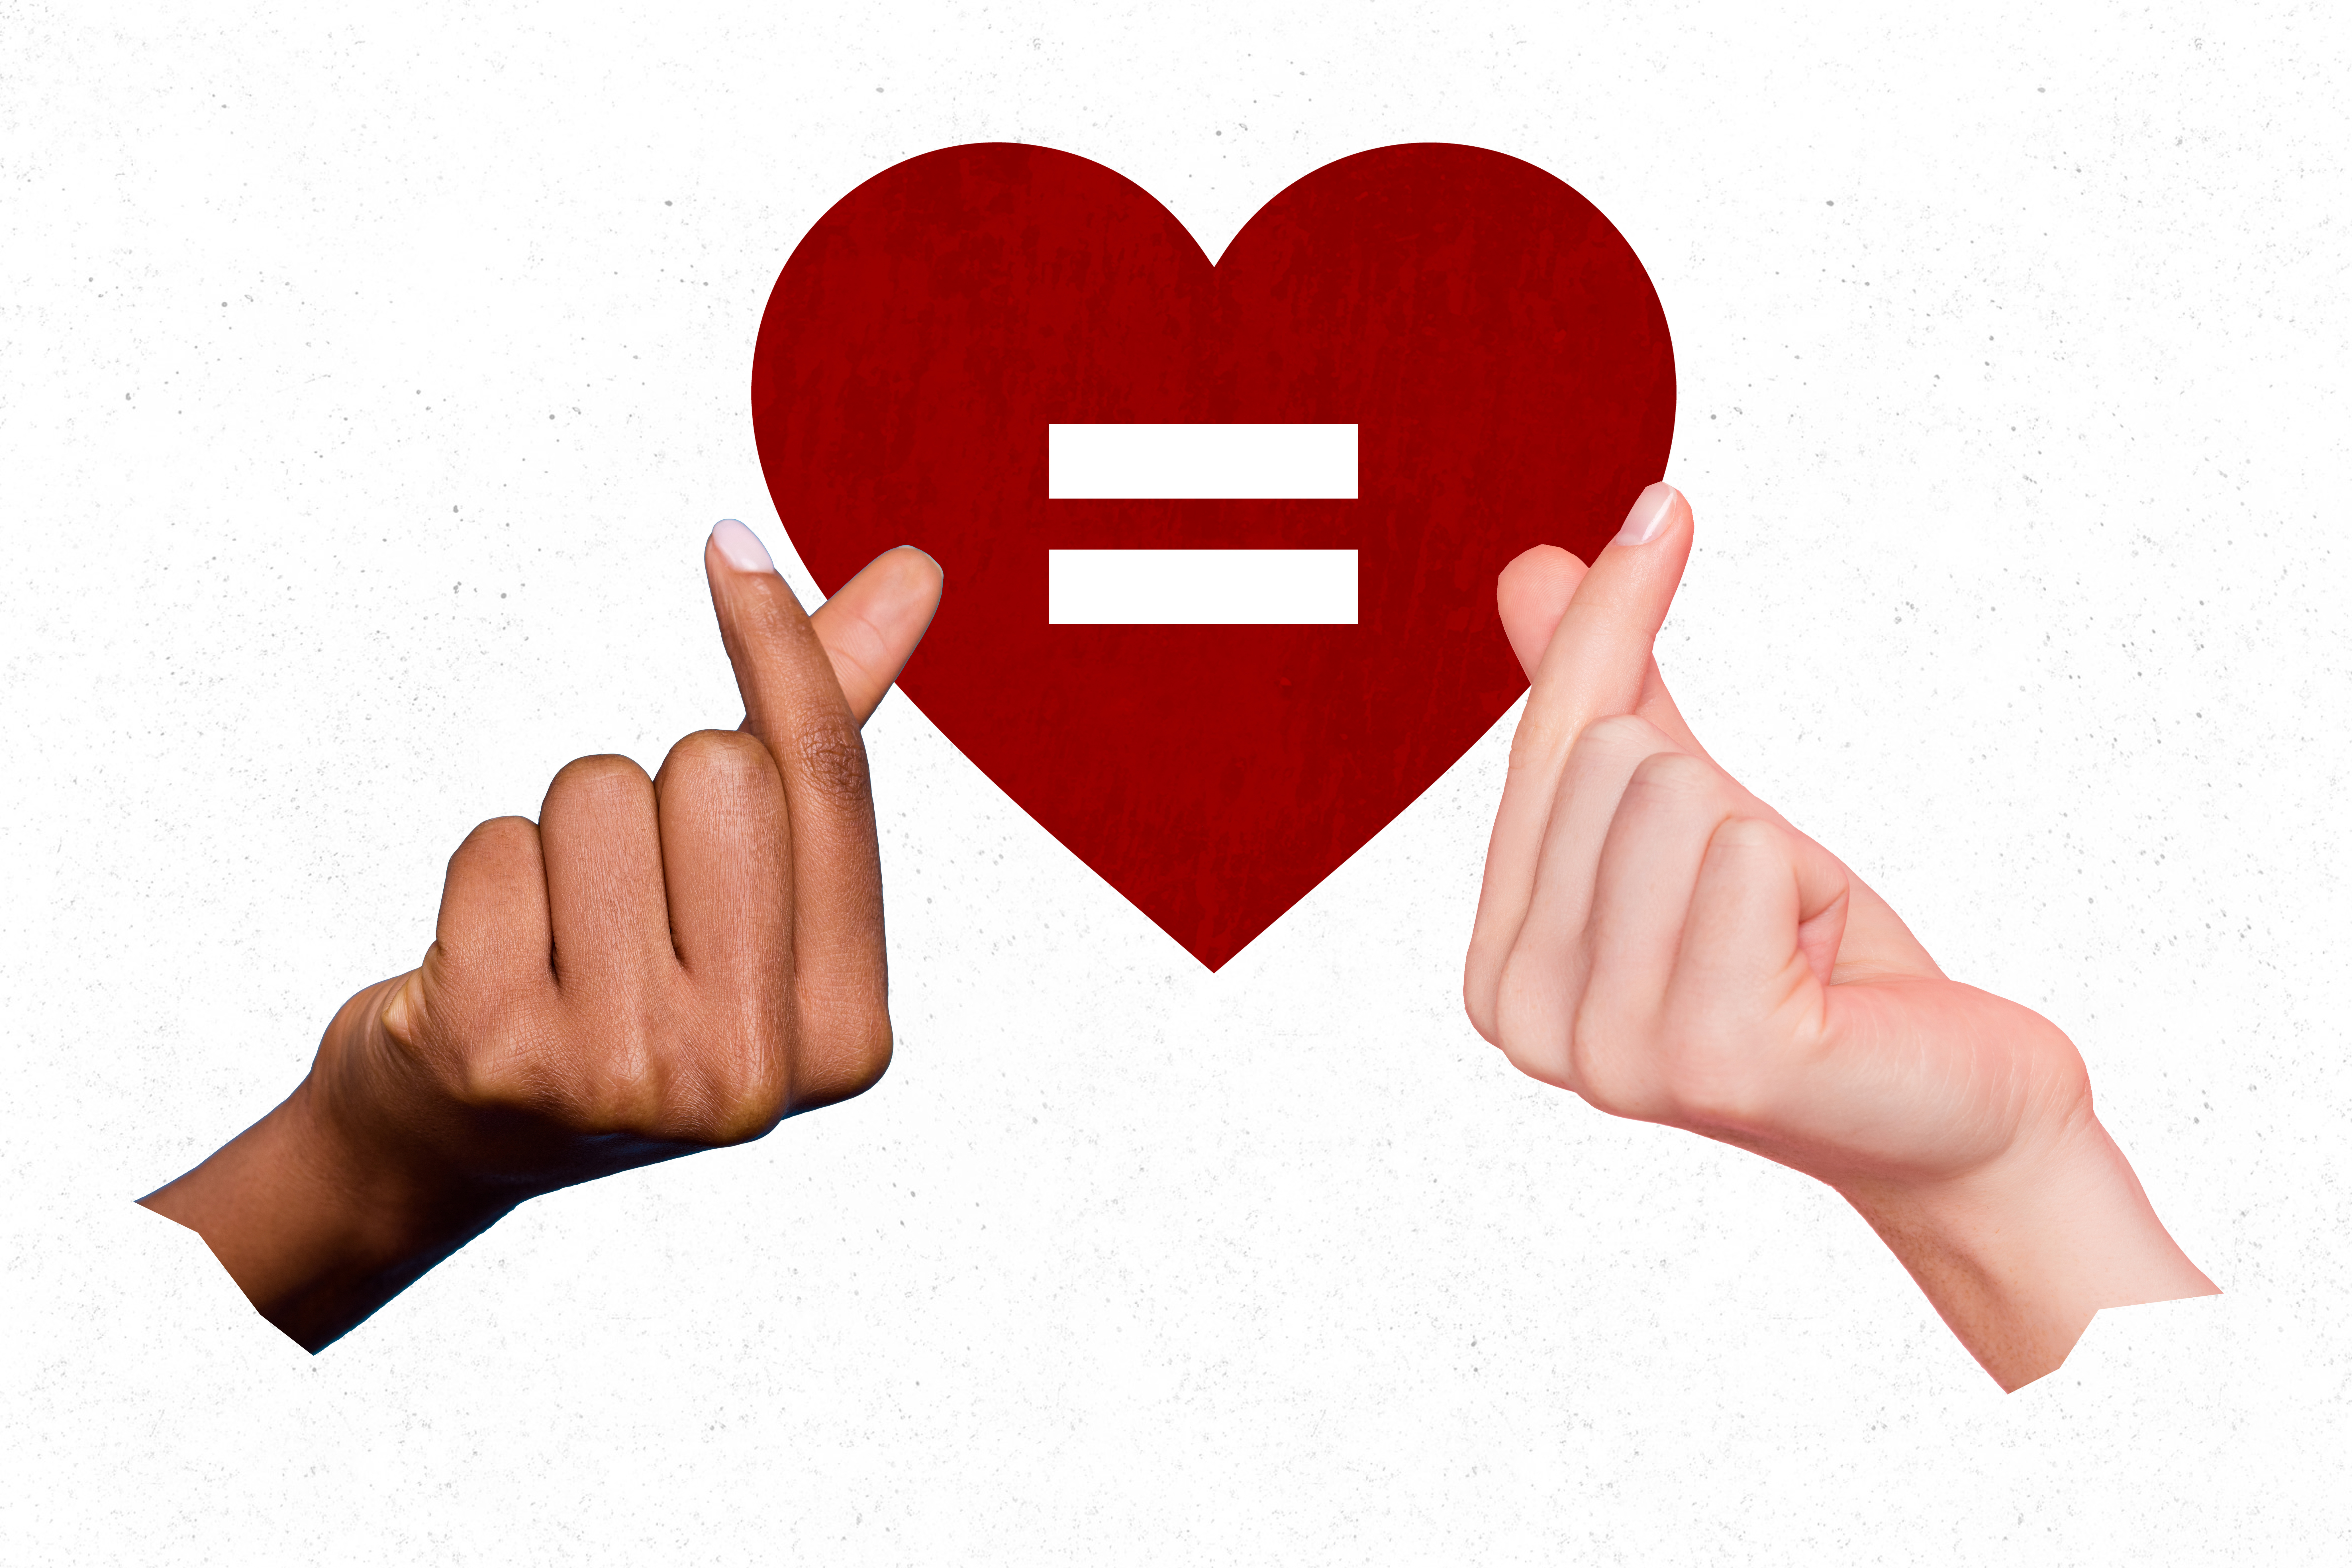 Two hands holding up heart with an "equal" symbol inside the heart